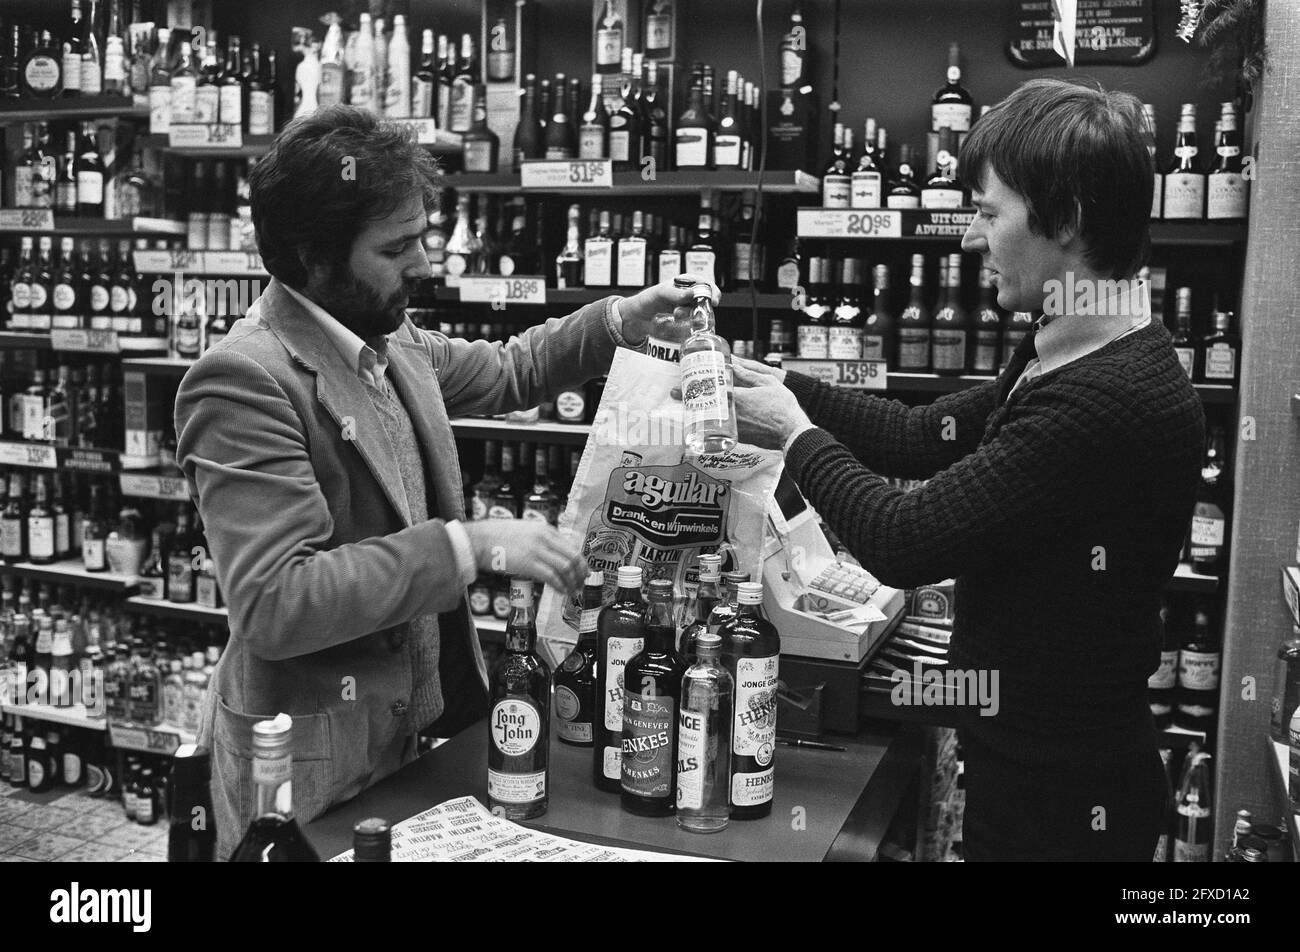 Customer and vendor at the counter, December 21, 1979, alcoholic beverages, stores, The Netherlands, 20th century press agency photo, news to remember, documentary, historic photography 1945-1990, visual stories, human history of the Twentieth Century, capturing moments in time Stock Photo